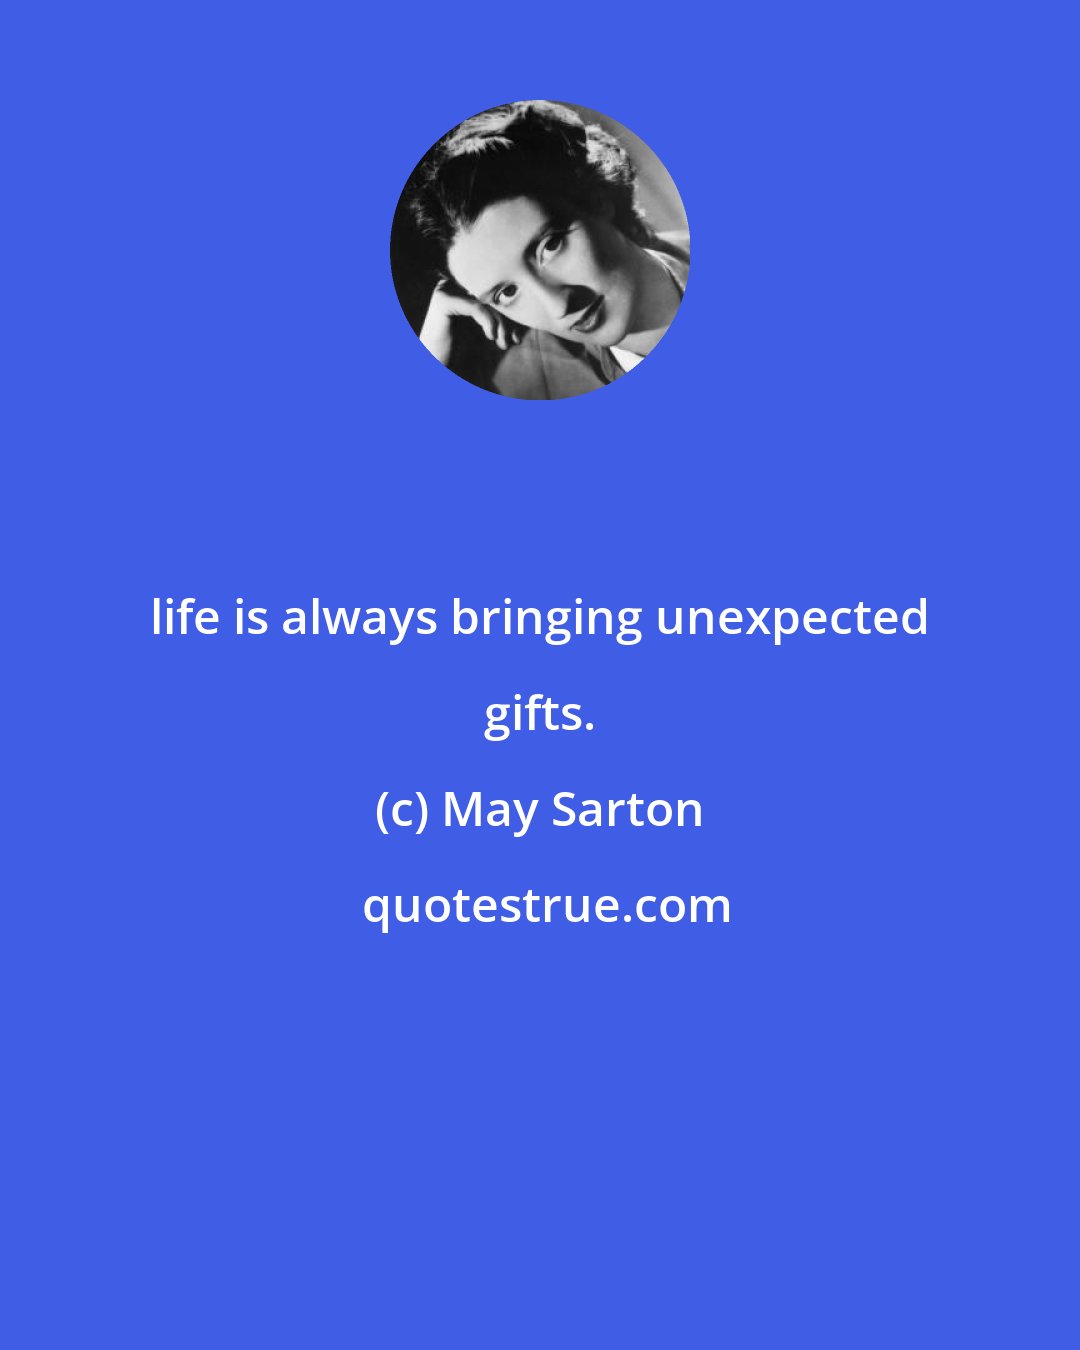 May Sarton: life is always bringing unexpected gifts.